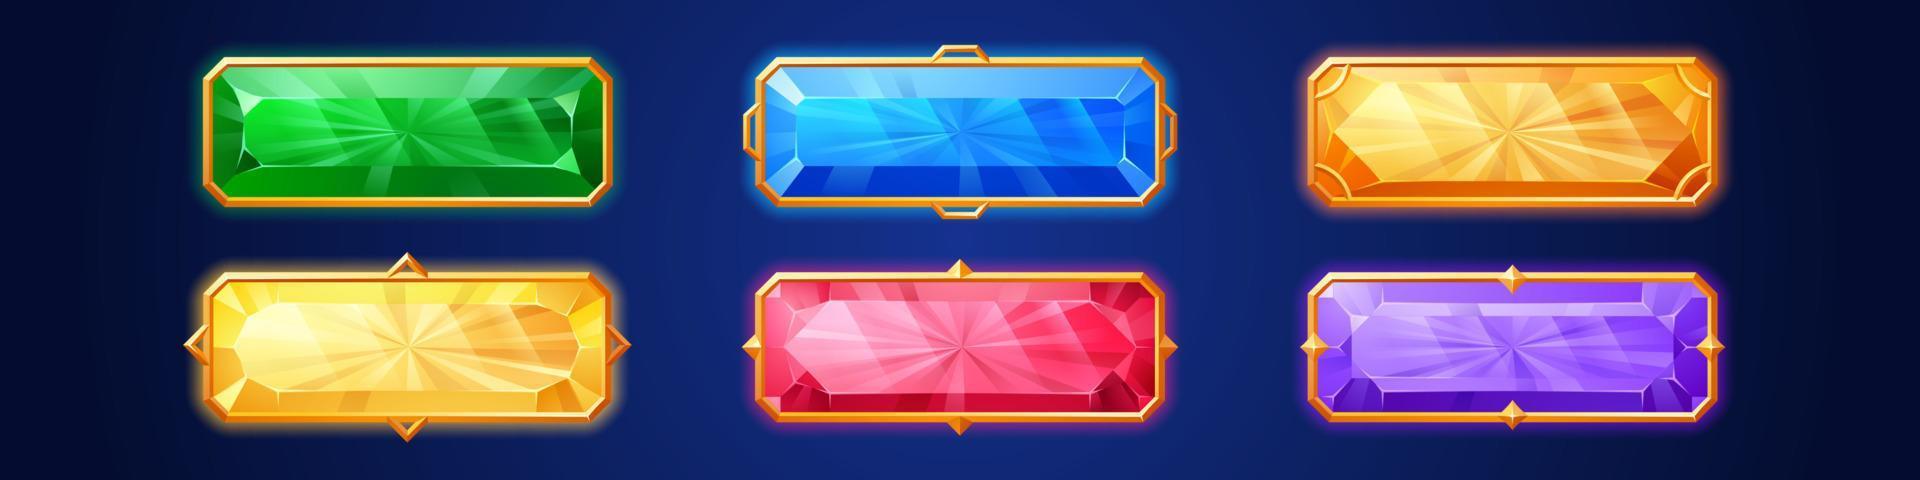 Game buttons from gems and gold frames vector